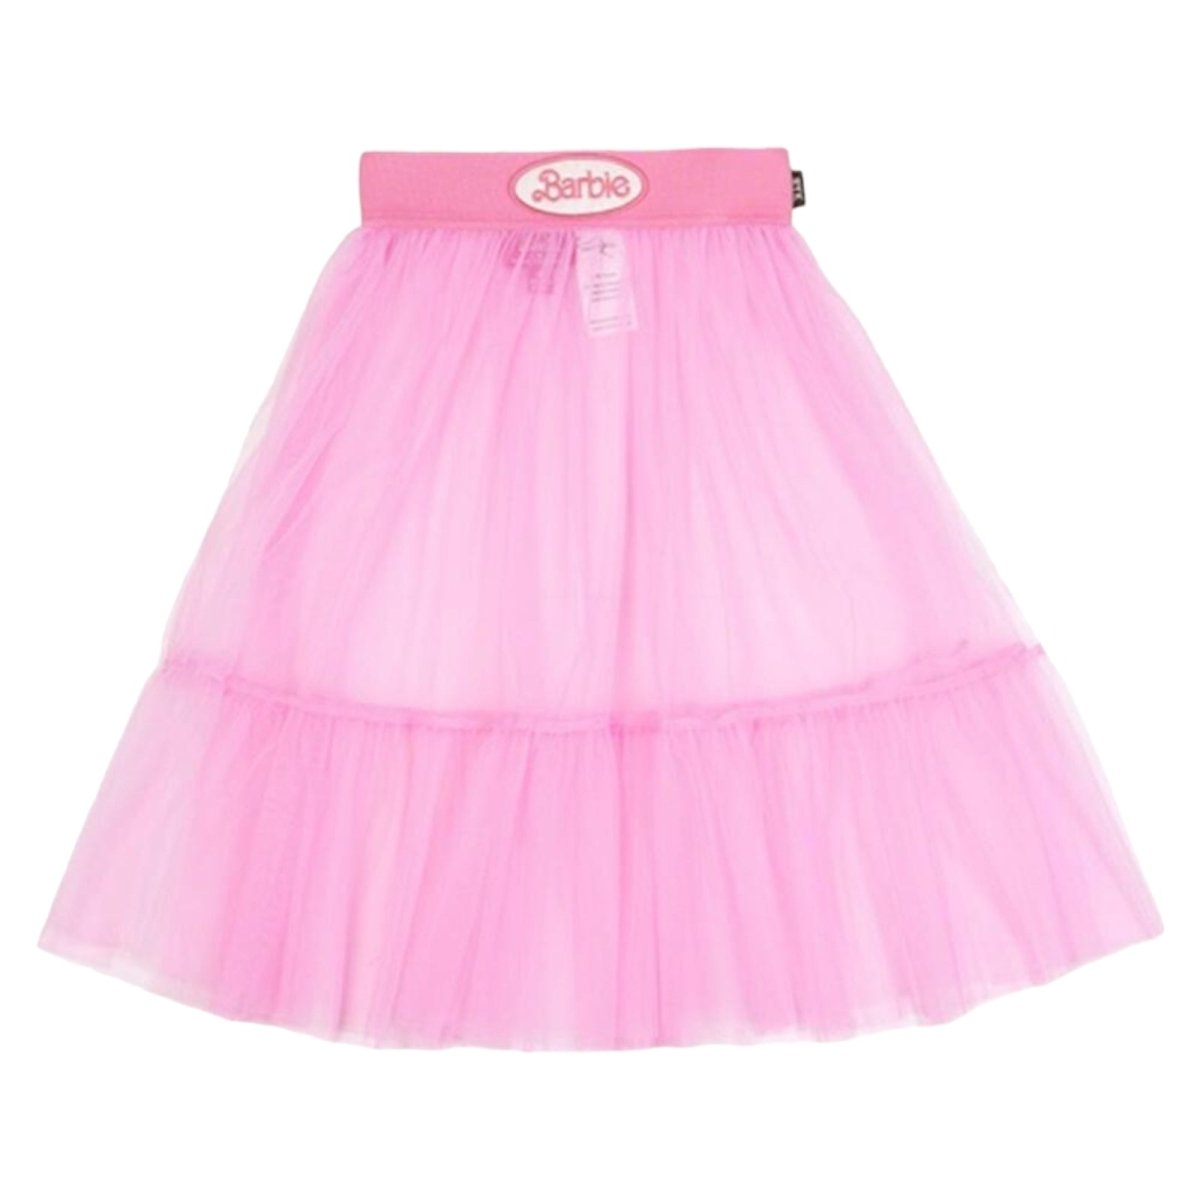 BARBIE SHEER PLEATED TULLE SKIRT (PREORDER) - ROCK YOUR BABY